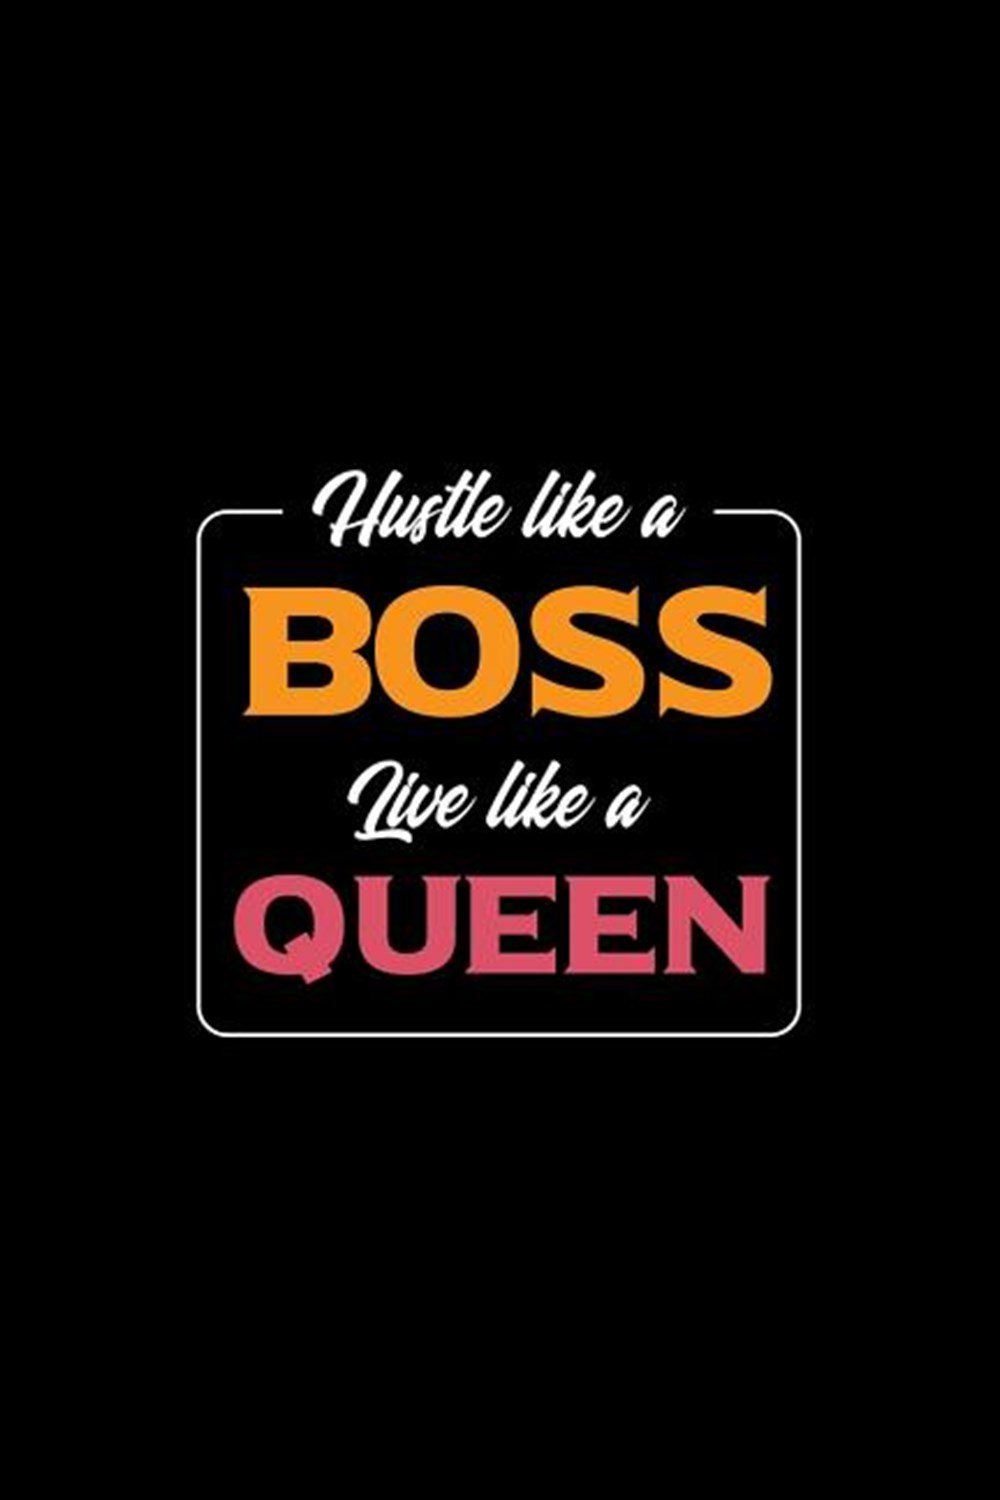 Hustle Like A Boss Live Like A Queen Blank Paper Sketch Book - Artist Sketch Pad Journal for Sketchi